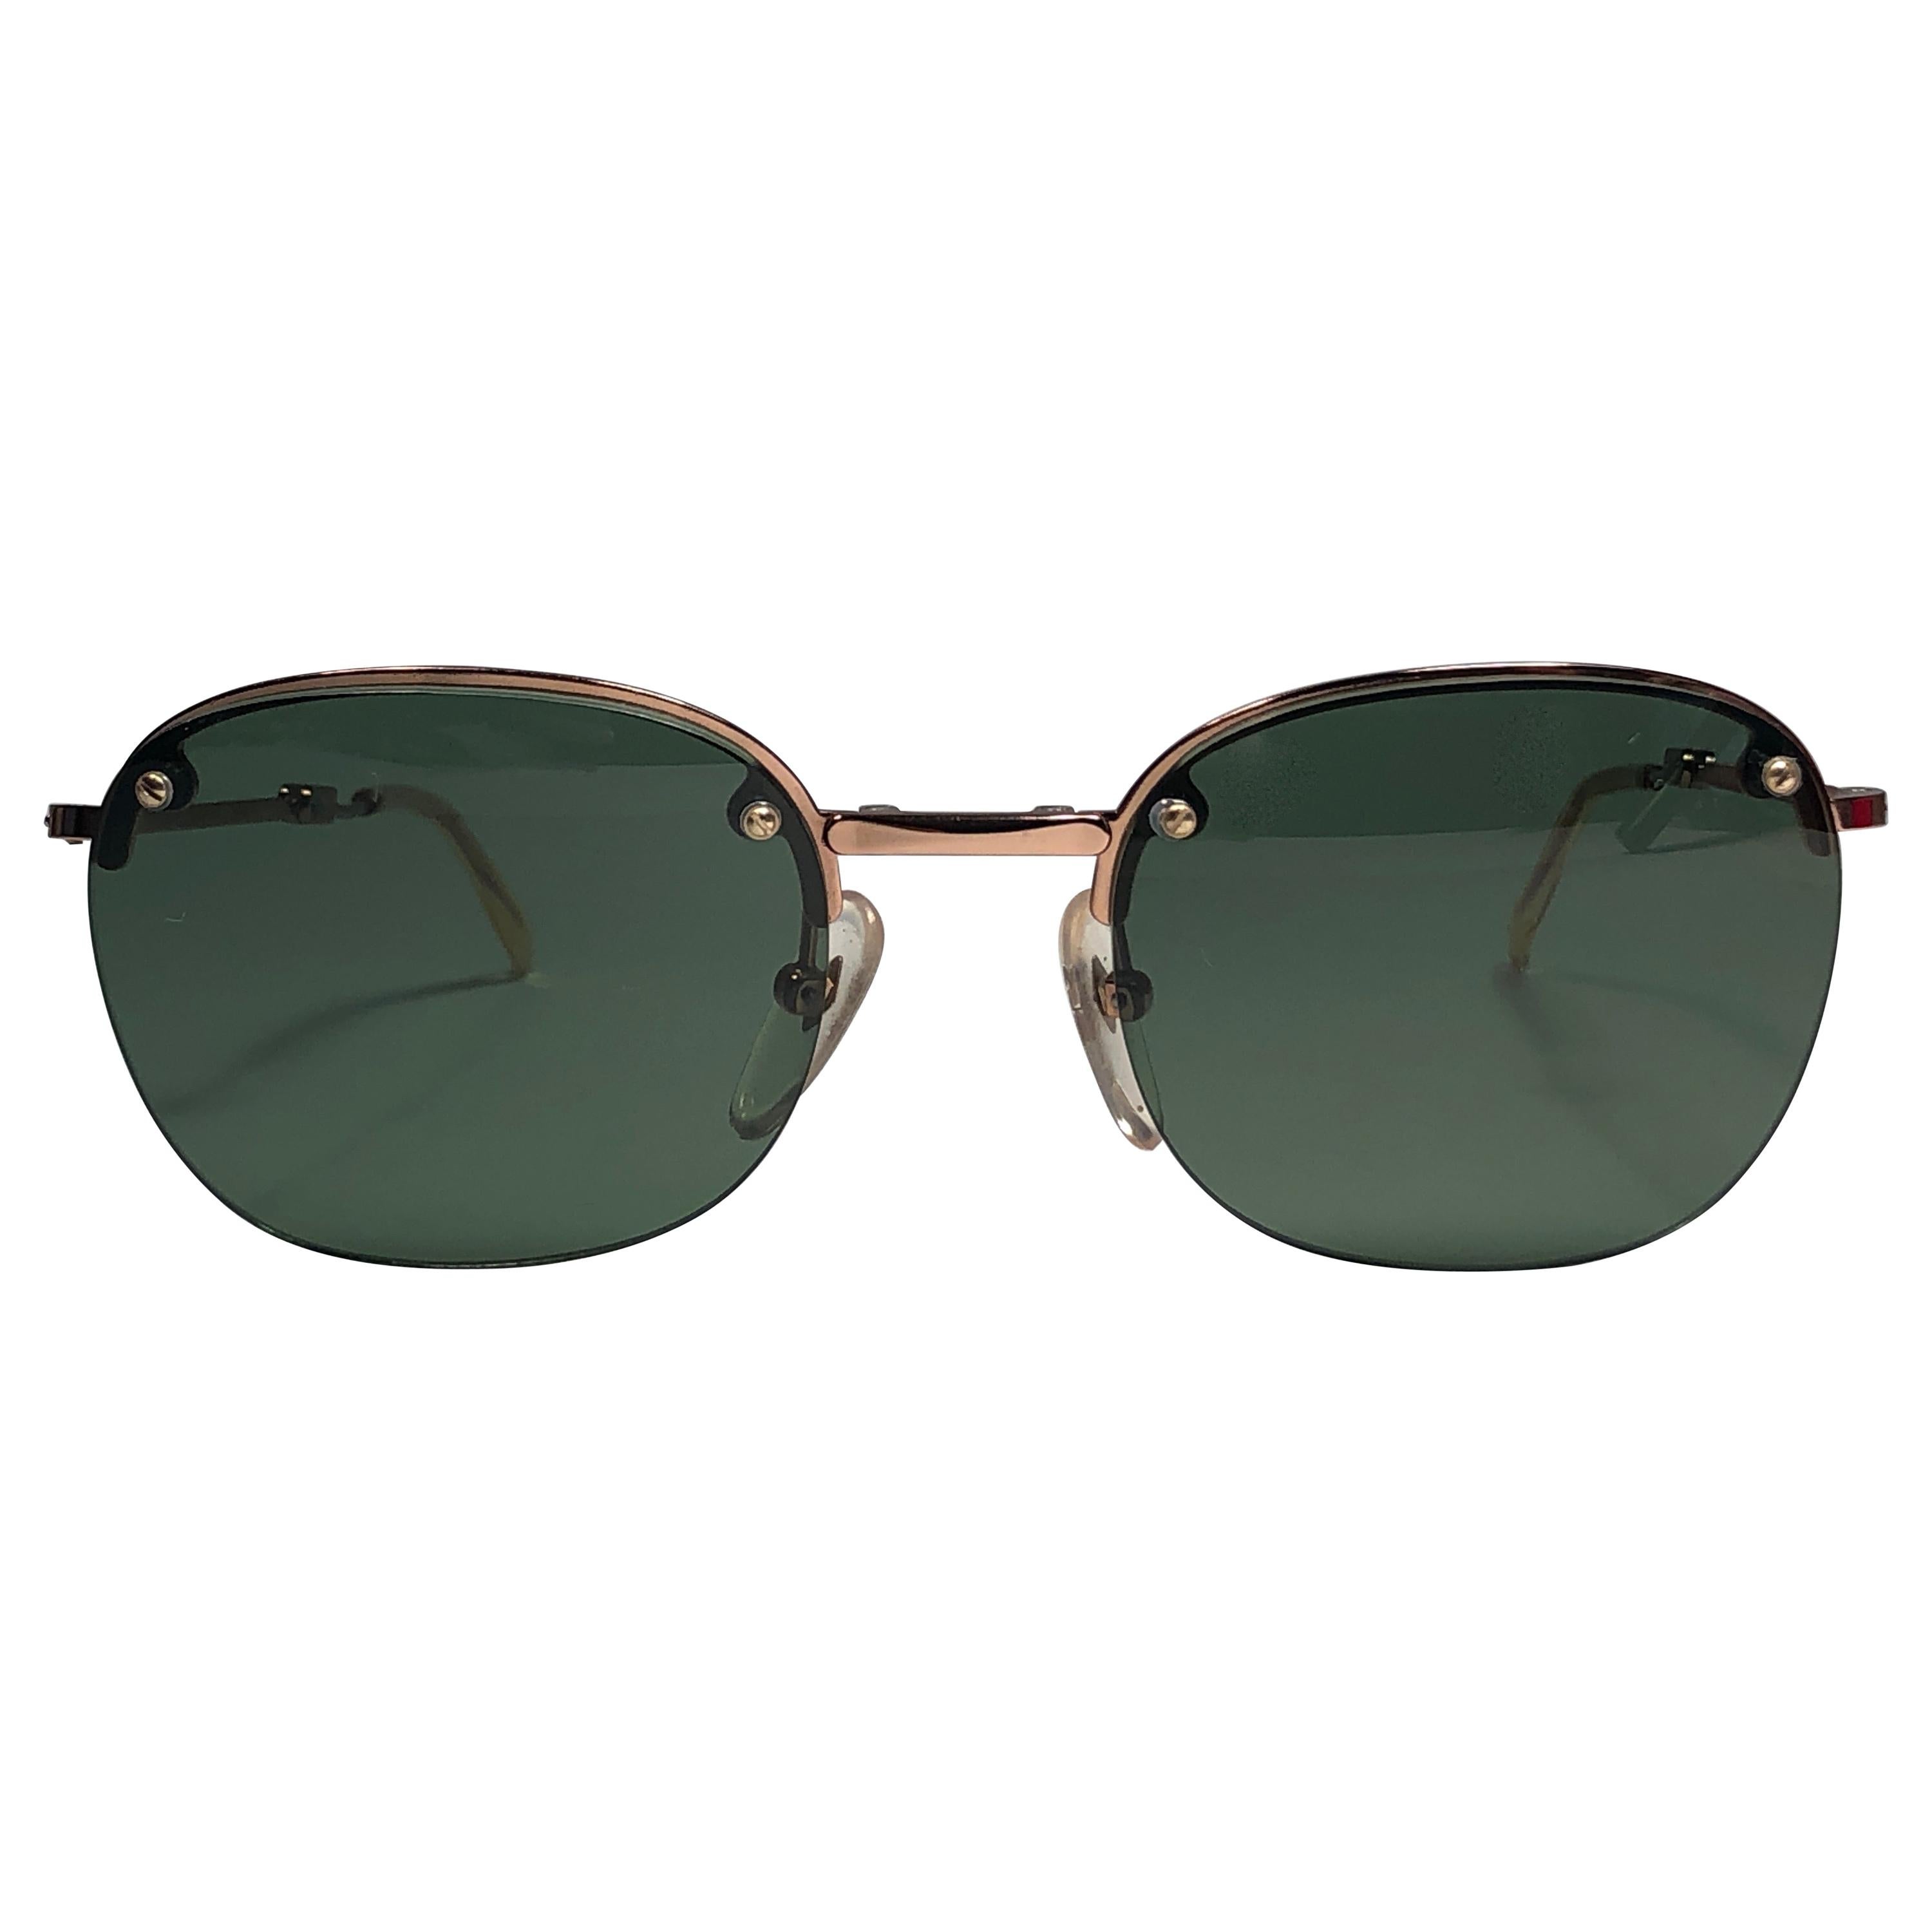 New Jean Paul Gaultier half frame foldable sunglasses.
Emerald green lenses that complete a ready to wear JPG look.

Amazing design with strong yet intricate details.
Design and produced in the 1990's.
New, never worn or displayed.
This item may